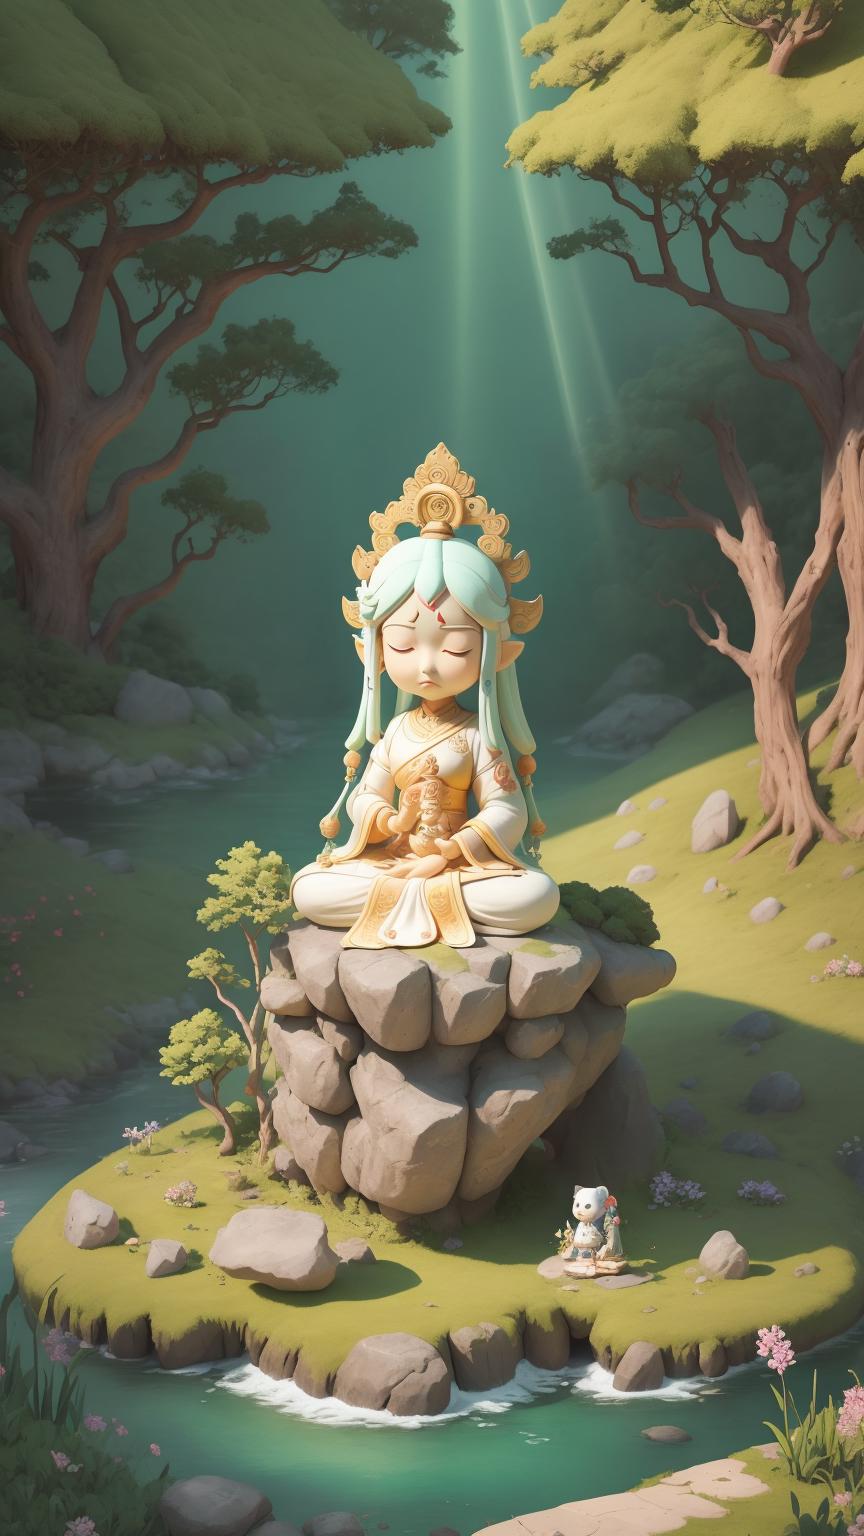 A serene scene featuring a gold and white statue of a woman sitting on a rock in a lush green forest. The statue exudes a sense of peace and tranquility, as she sits in a meditative pose with her eyes closed. The forest around her is filled with trees and rocks, creating a picturesque and calming atmosphere.